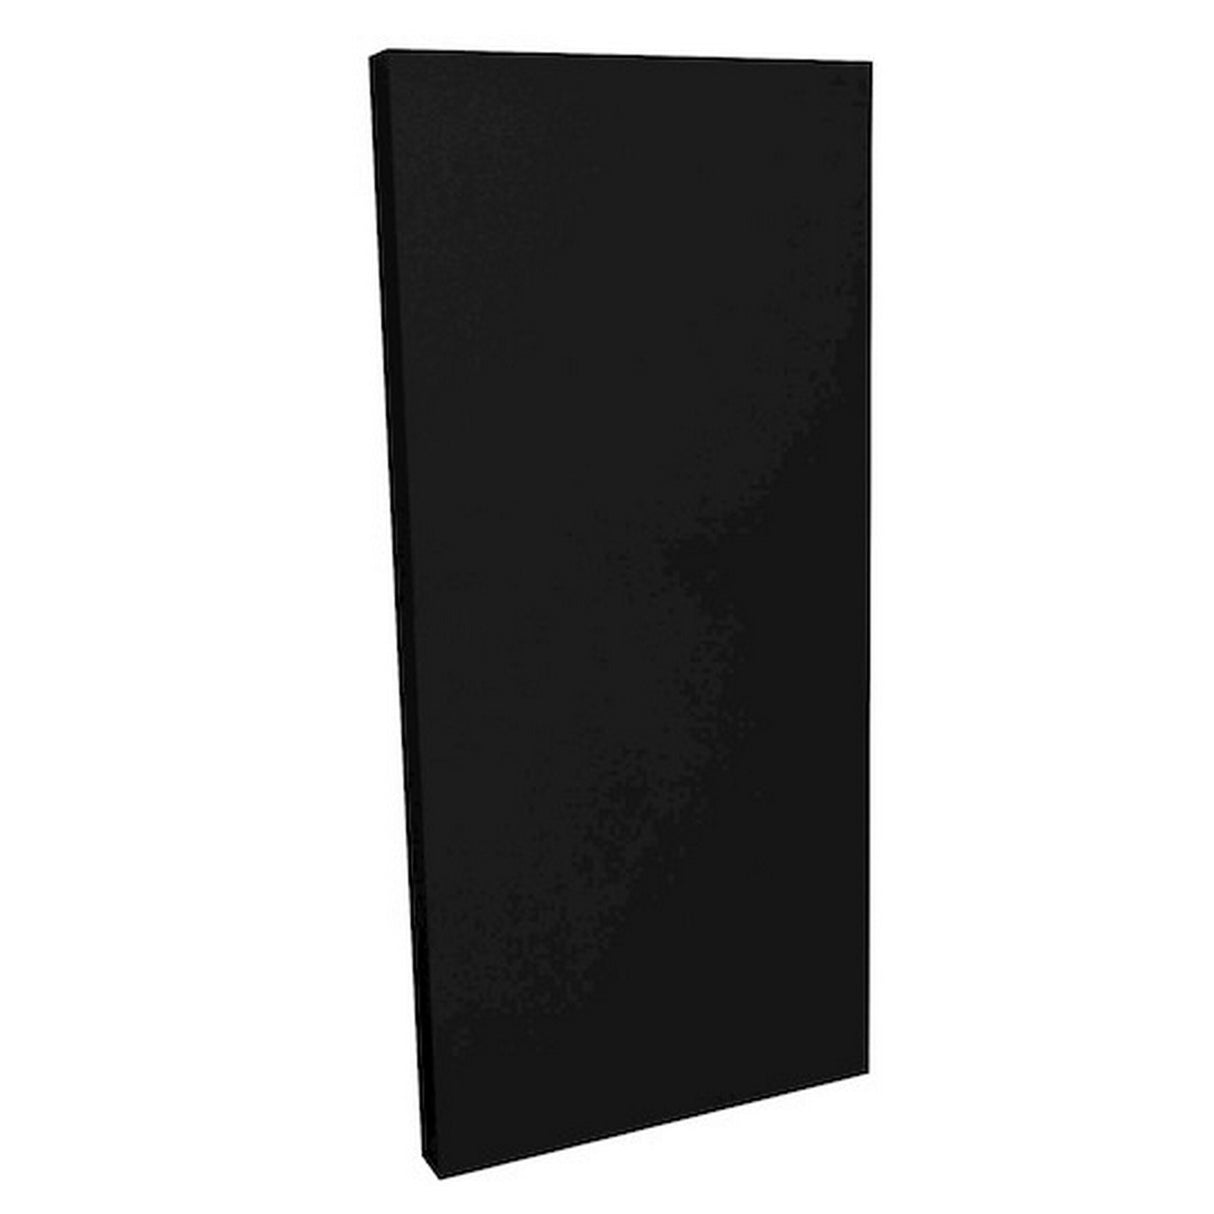 GeerFab ProZorber 2448 24 x 48 Inch By 2 Inch Panels, Pair, Black